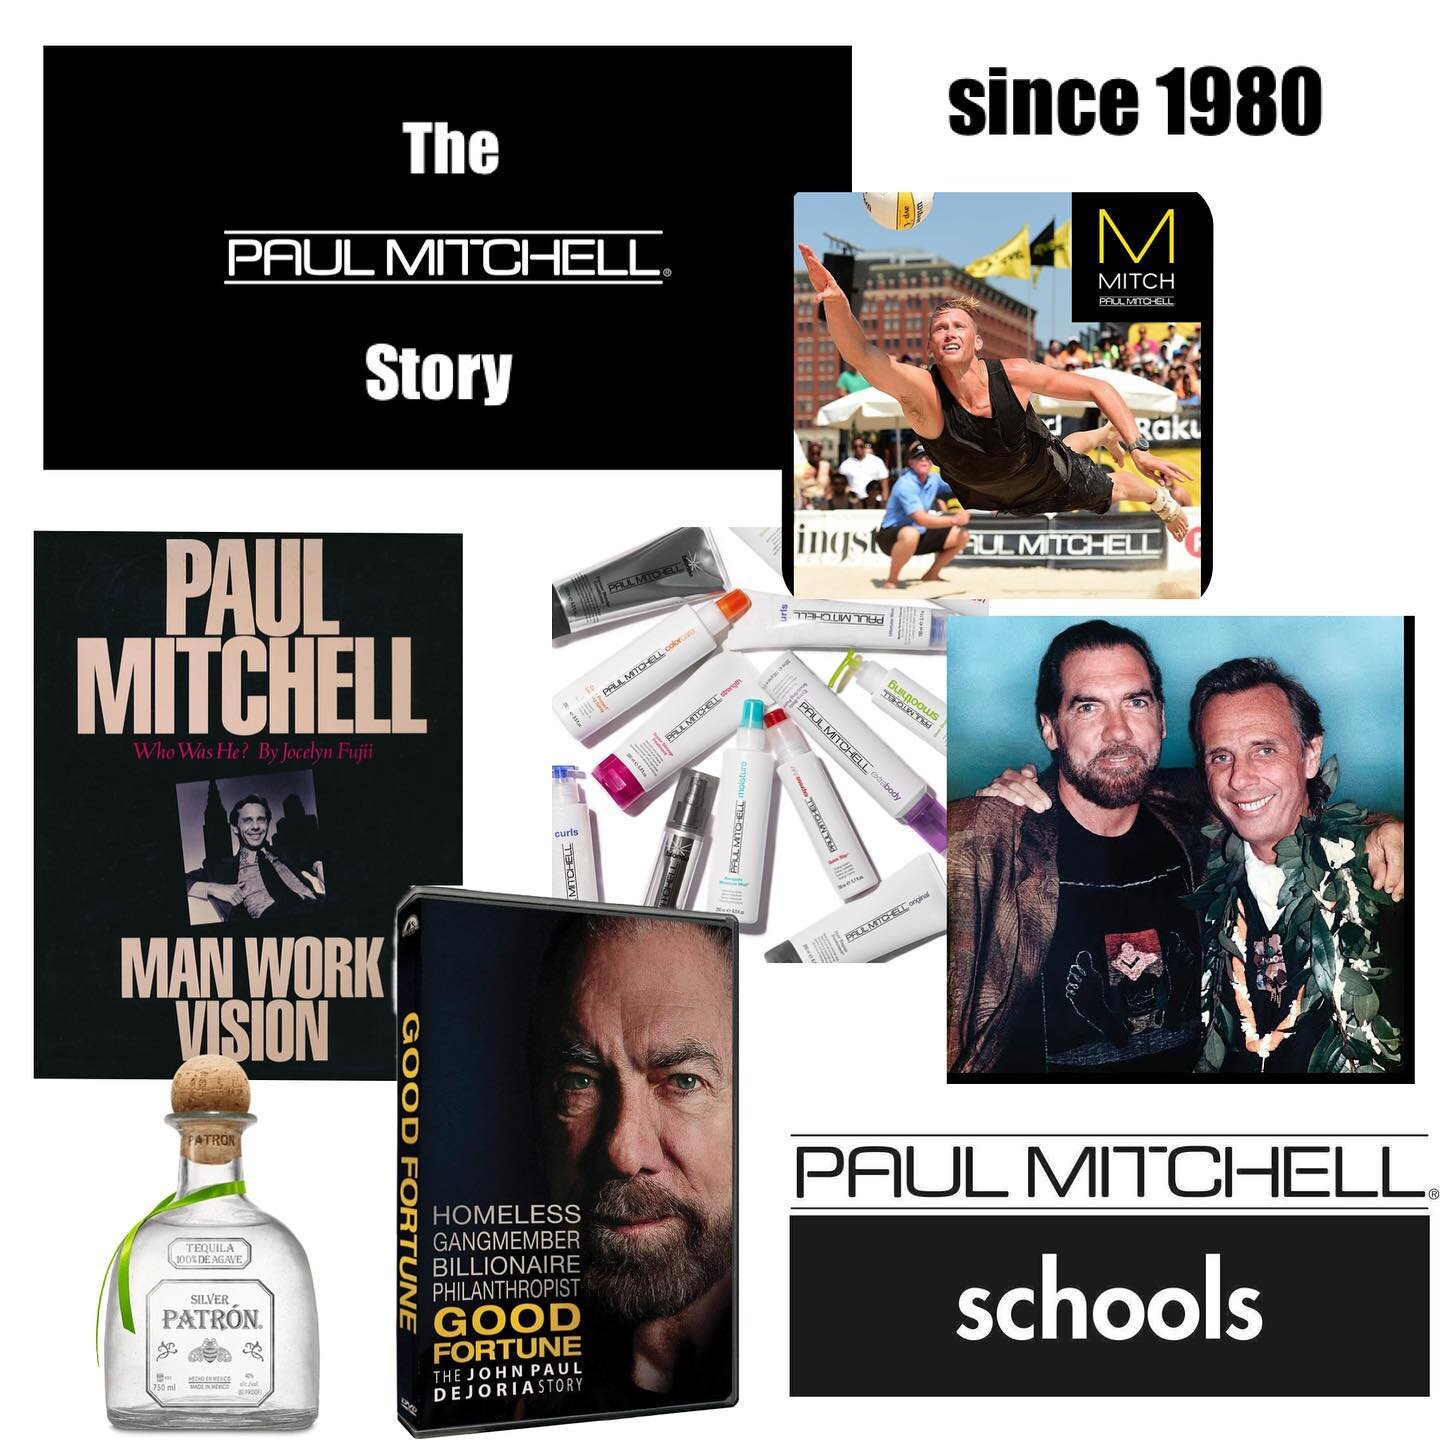 Who&rsquo;s excited for the next #StoryTime series on the YFYI Podcast?🙋🏽&zwj;♂️🙋🏽&zwj;♂️🙋🏽&zwj;♂️I&rsquo;m going to be covering the 40 year history of building the @paulmitchell company!
&bull;
&bull;
&bull;
#paulmitchell #pmtslife #entreprene